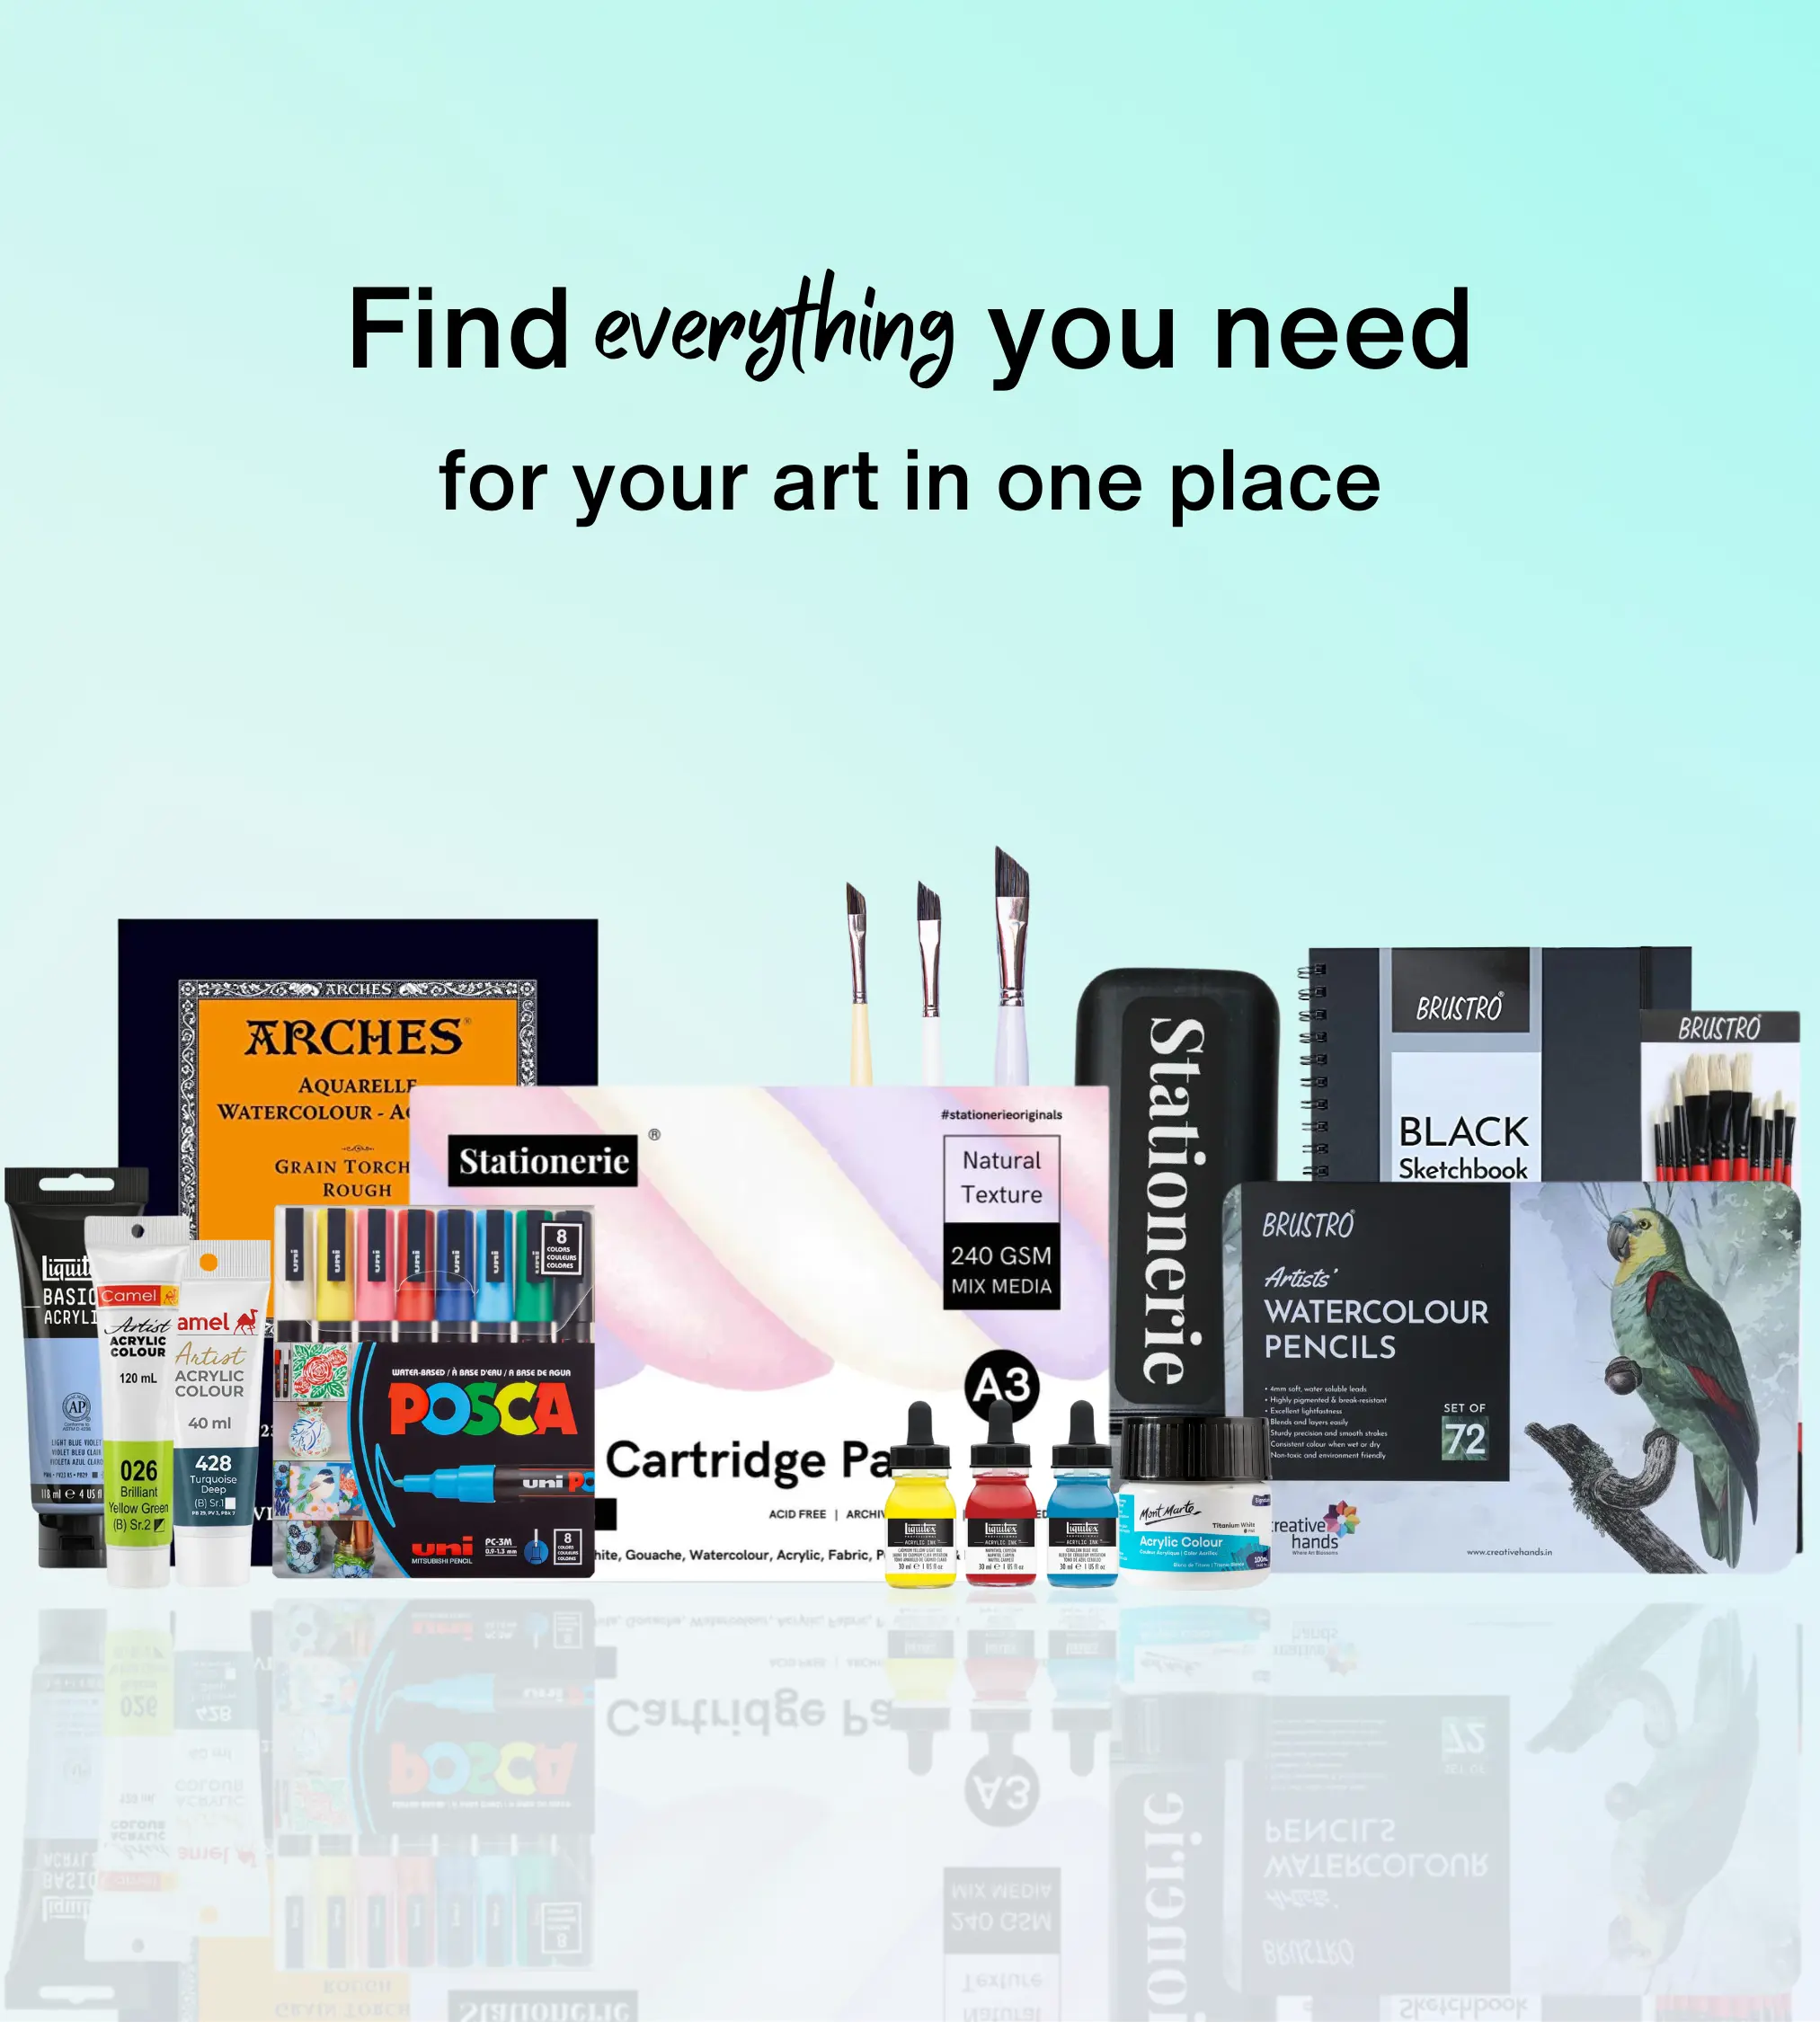 Find everything you need for your art in one place (2)